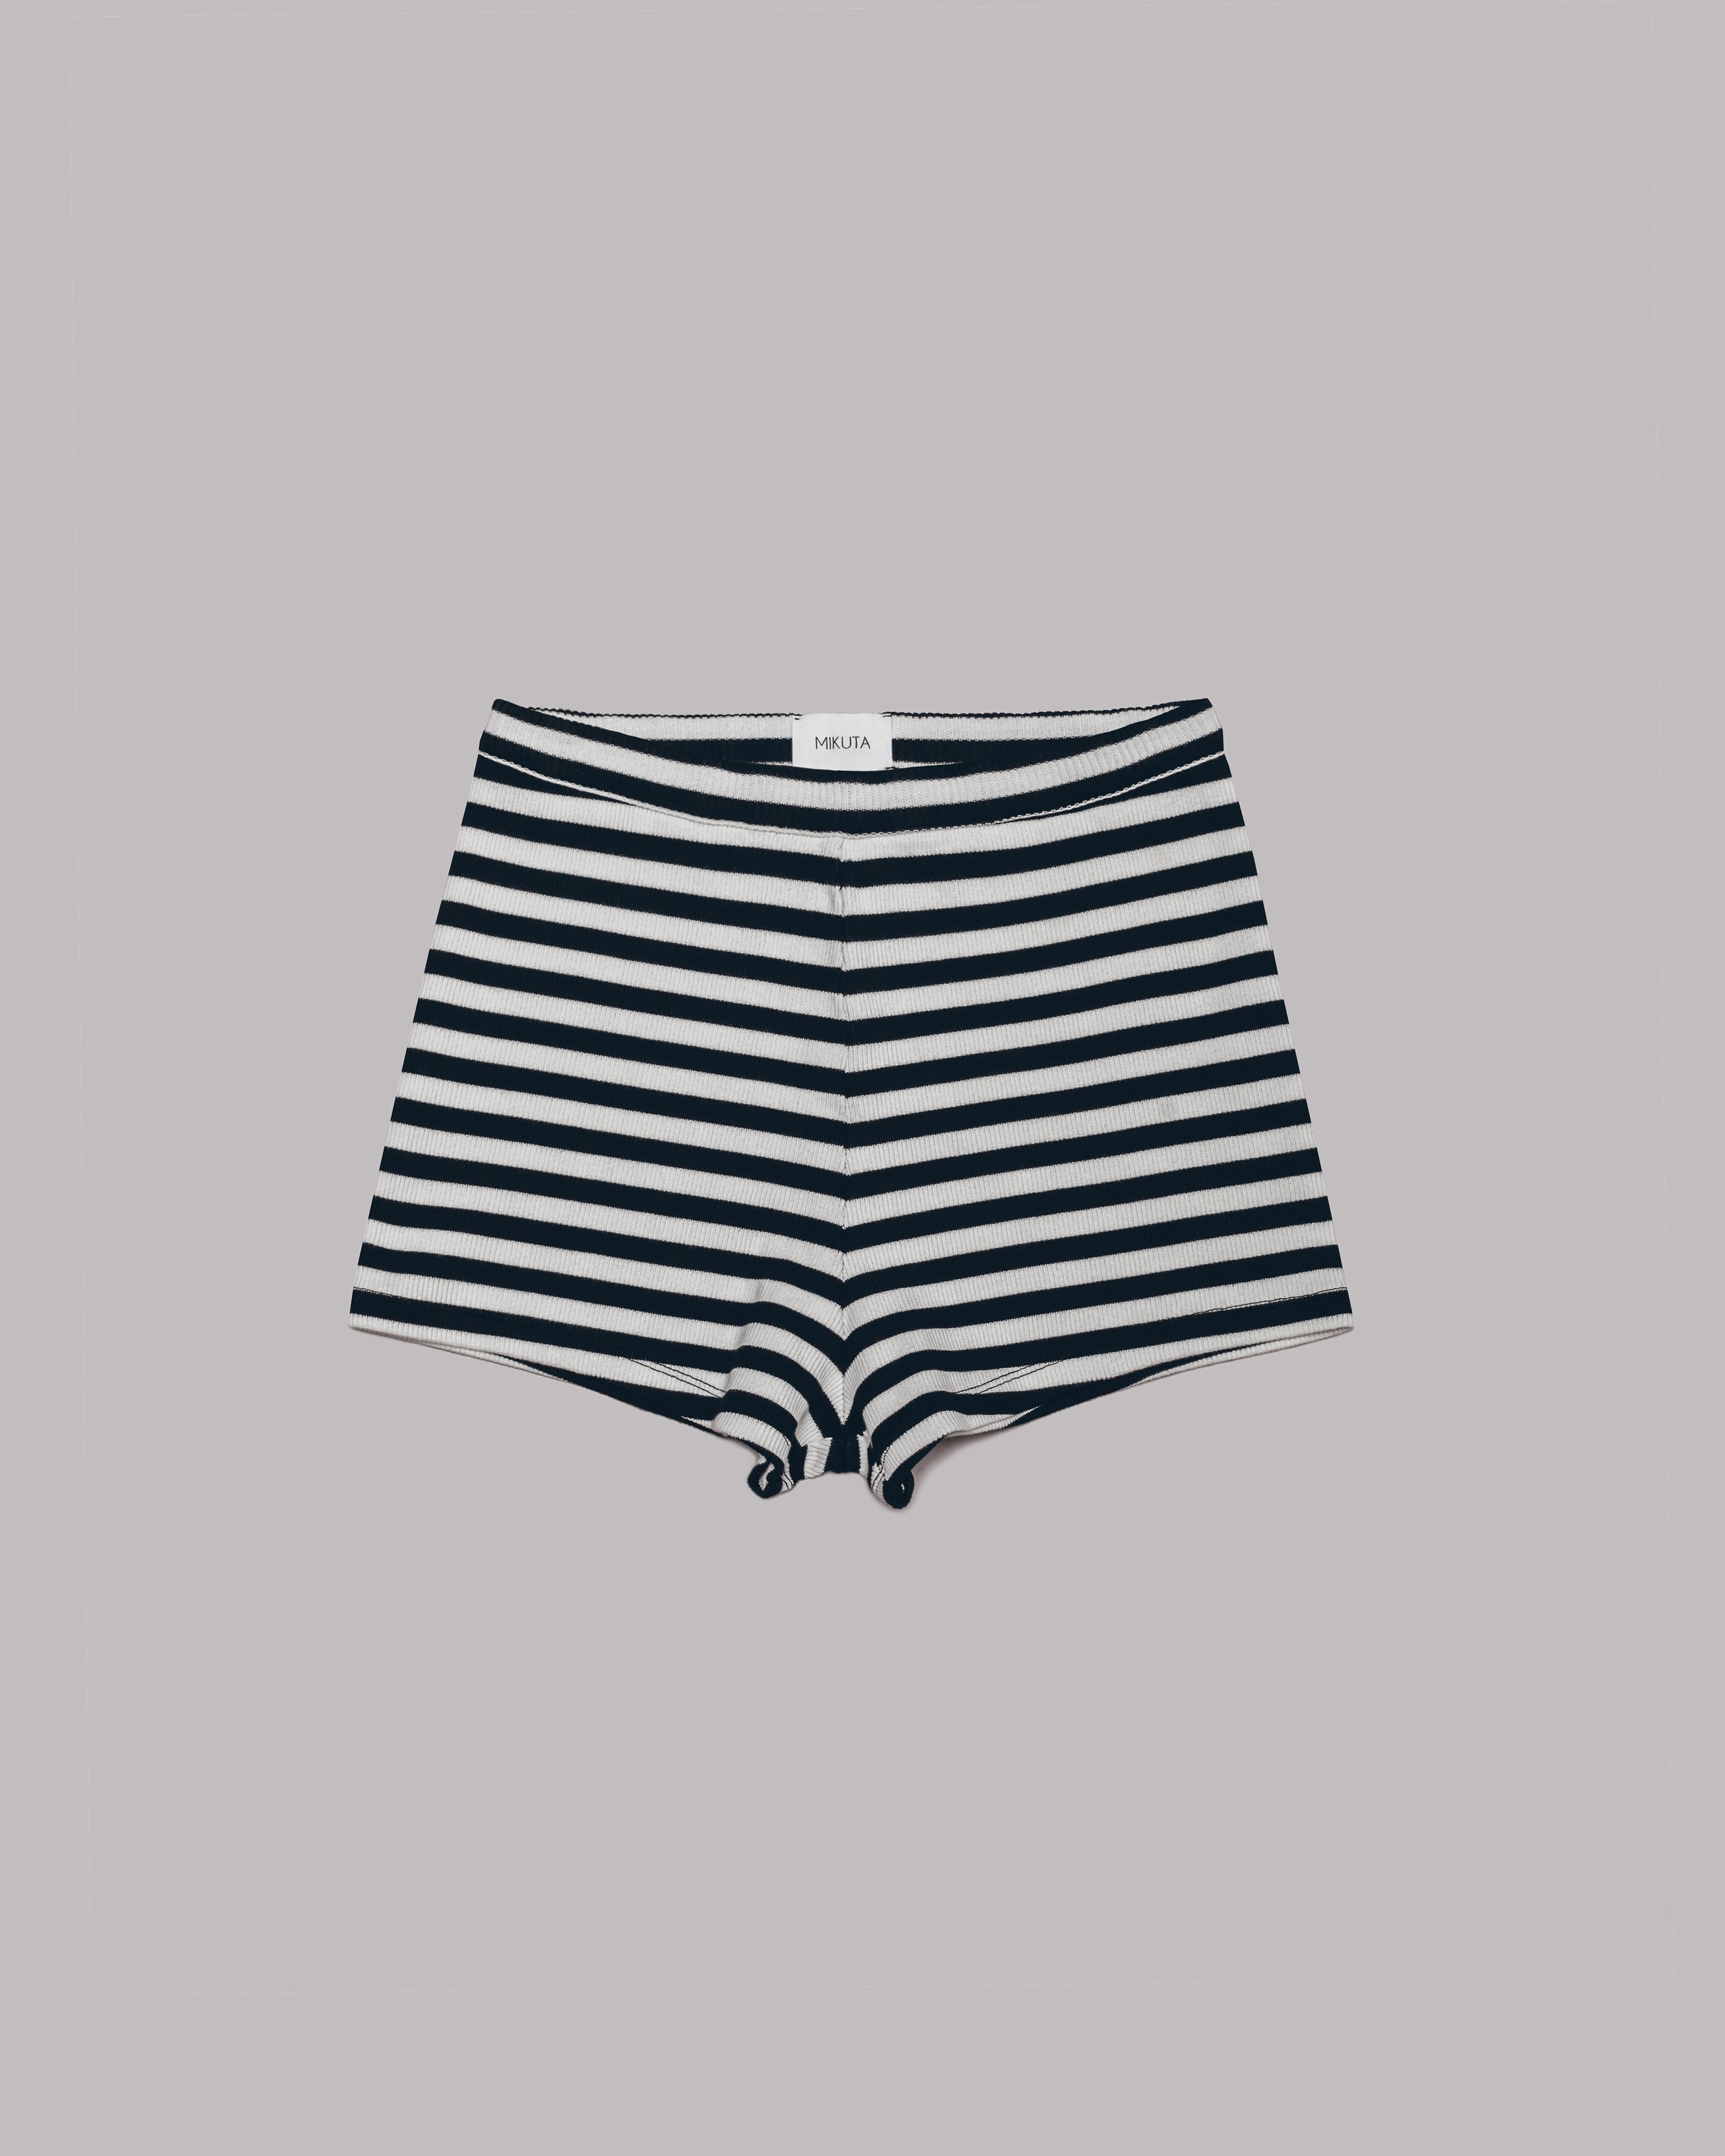 The Striped Ribbed Shorts